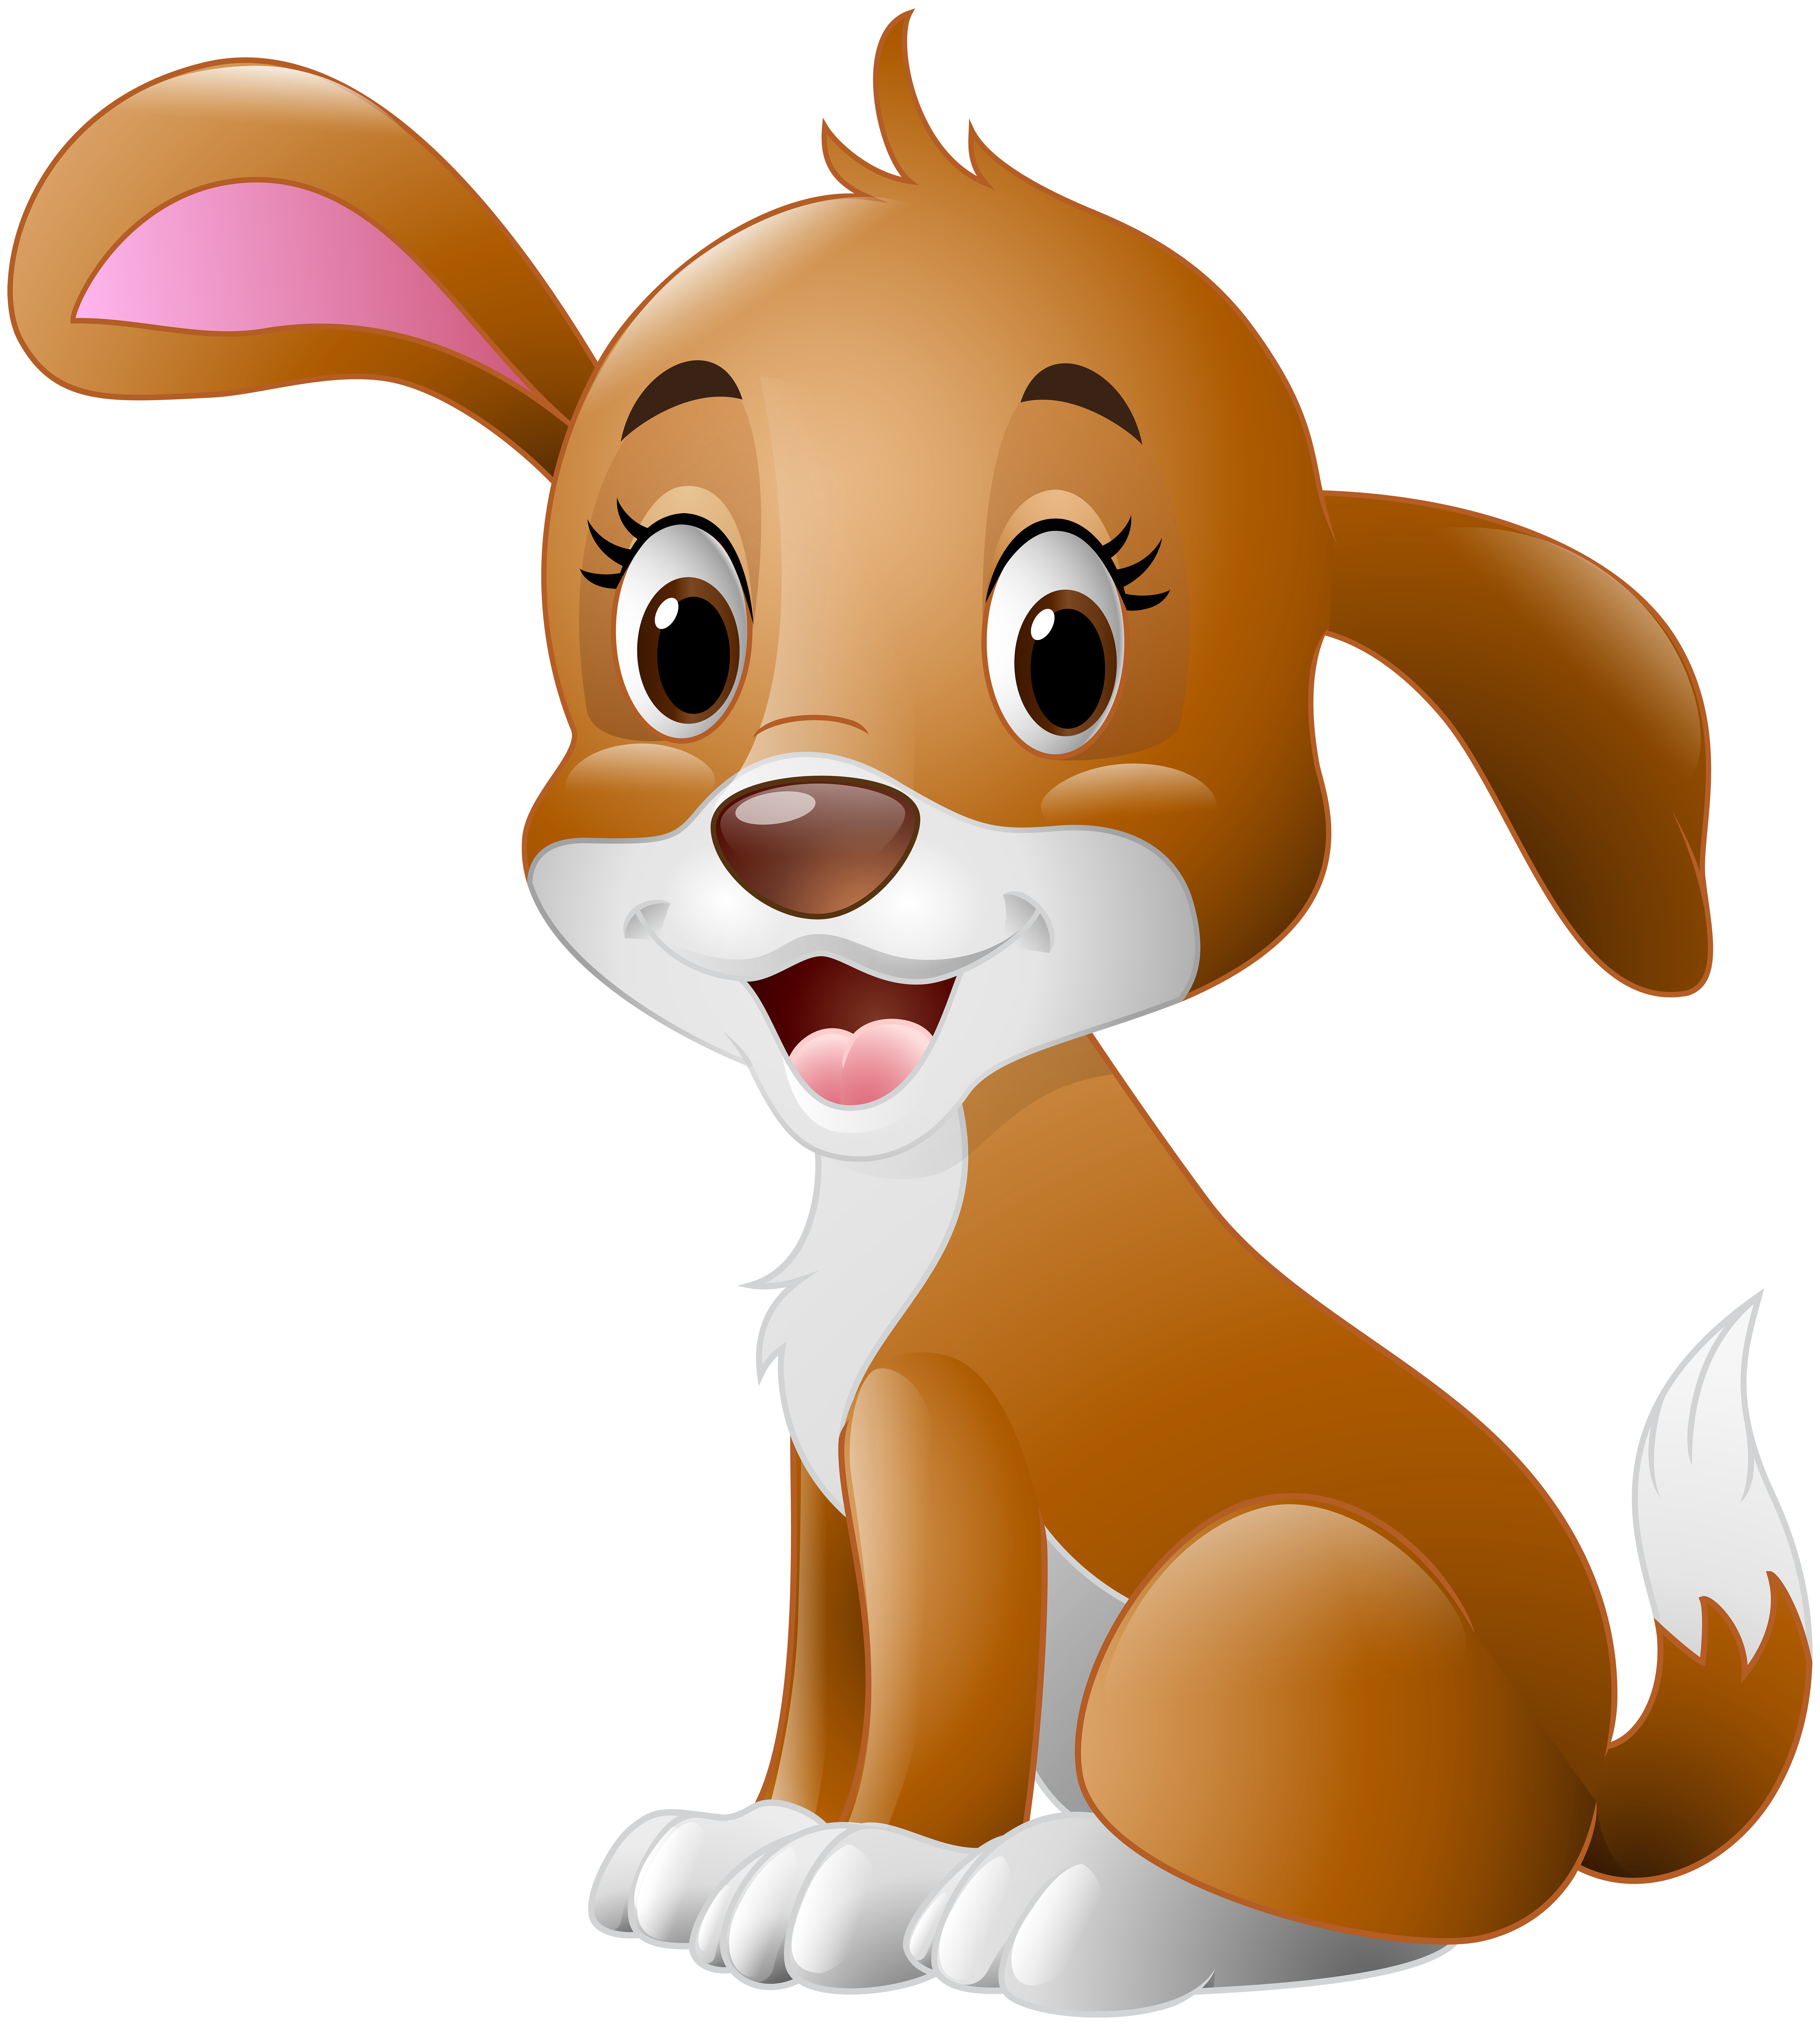 Cute Dog Cartoon PNG Clip Art Image​ | Gallery Yopriceville - High-Quality Free  Images and Transparent PNG Clipart